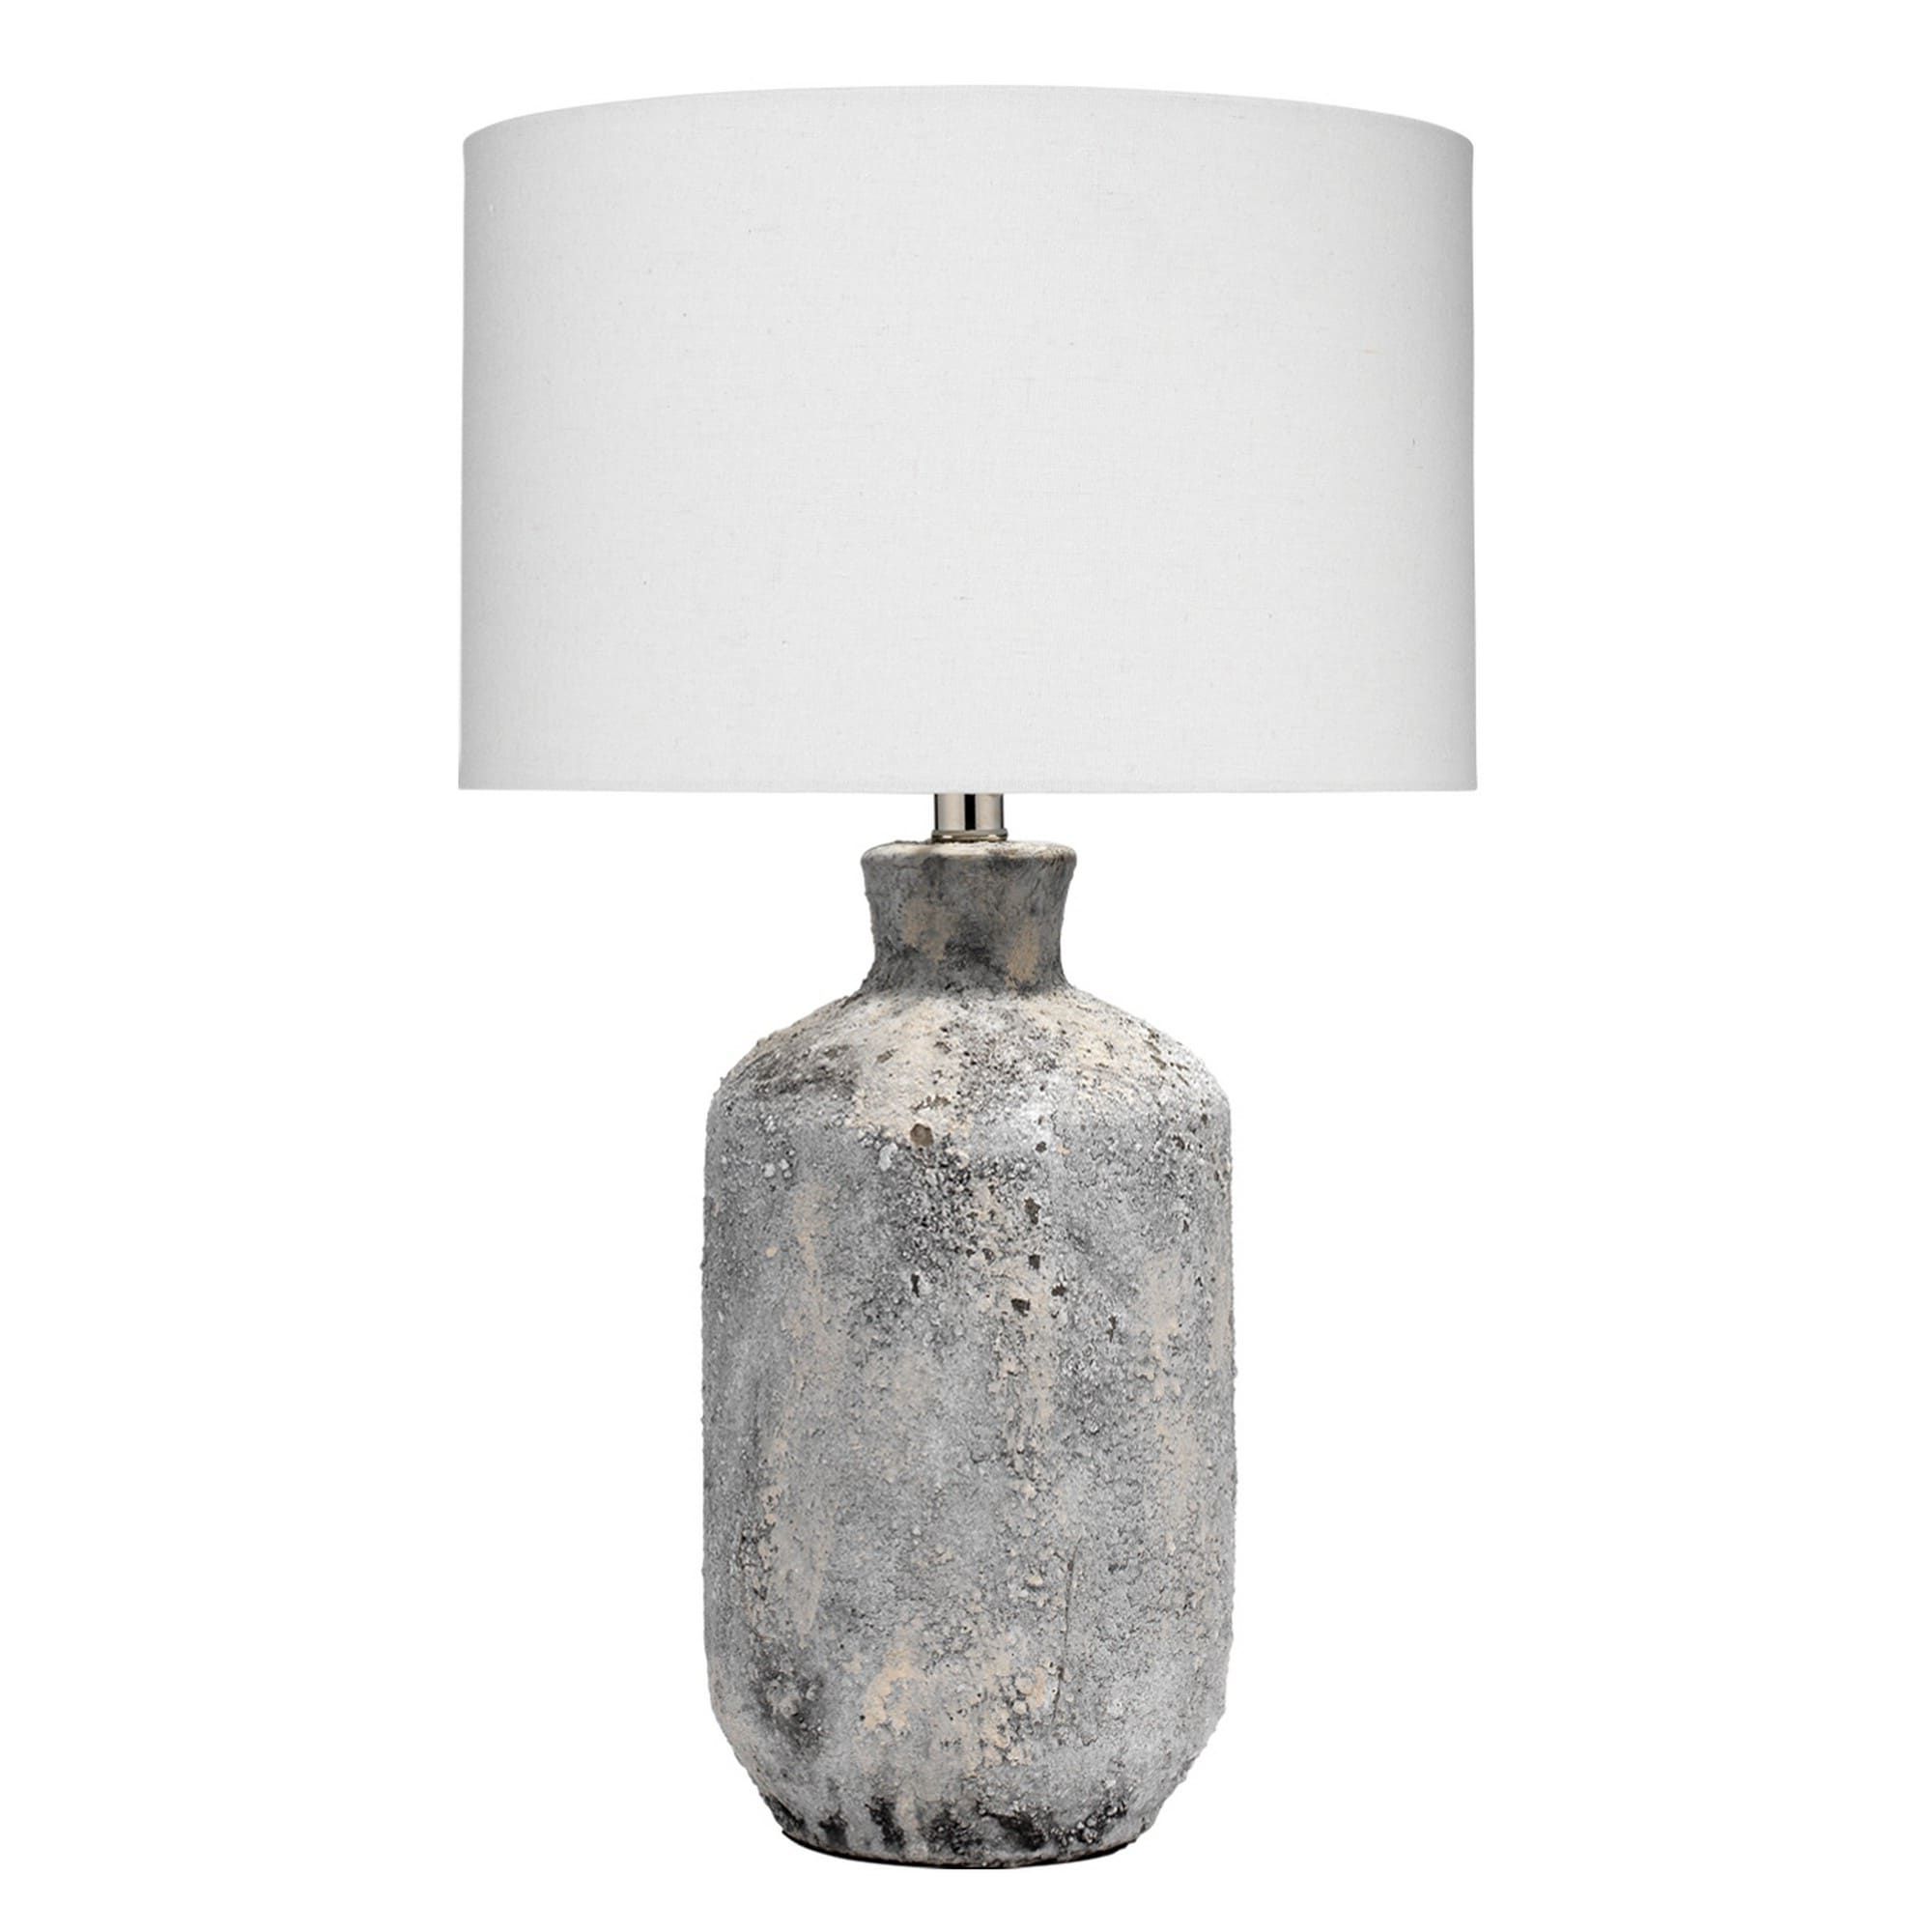 Widely Used Ceramic Table Lamp With Textured Finish, White And Gray – On Sale –  Overstock – 34279733 In Grey Textured Standing Lamps (View 7 of 15)